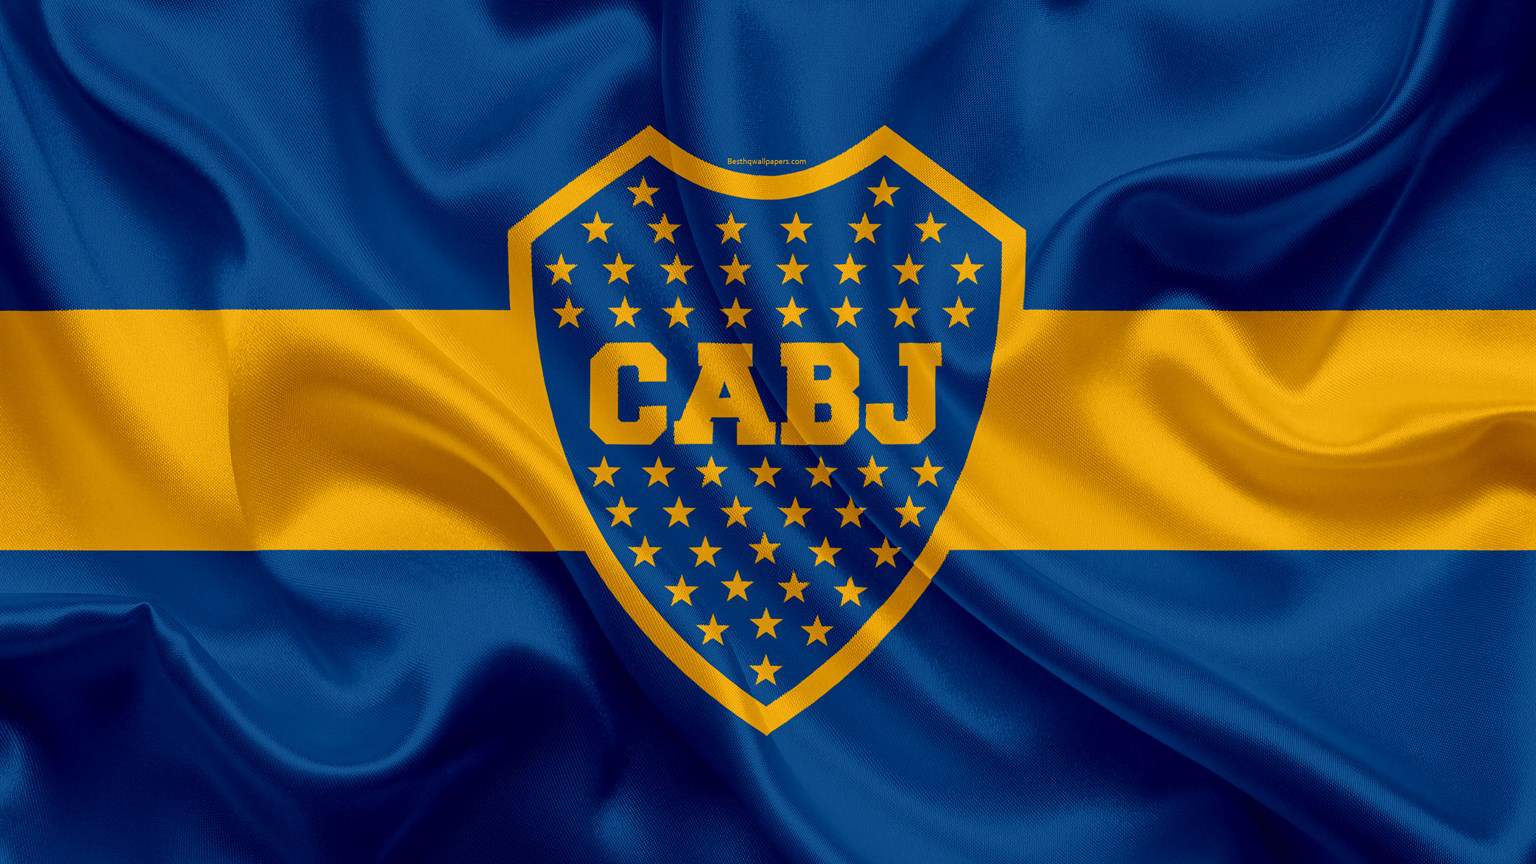 Argentina’s Largest Soccer Team, Boca Juniors, Is Considering to Launch a Club NFT thumbnail